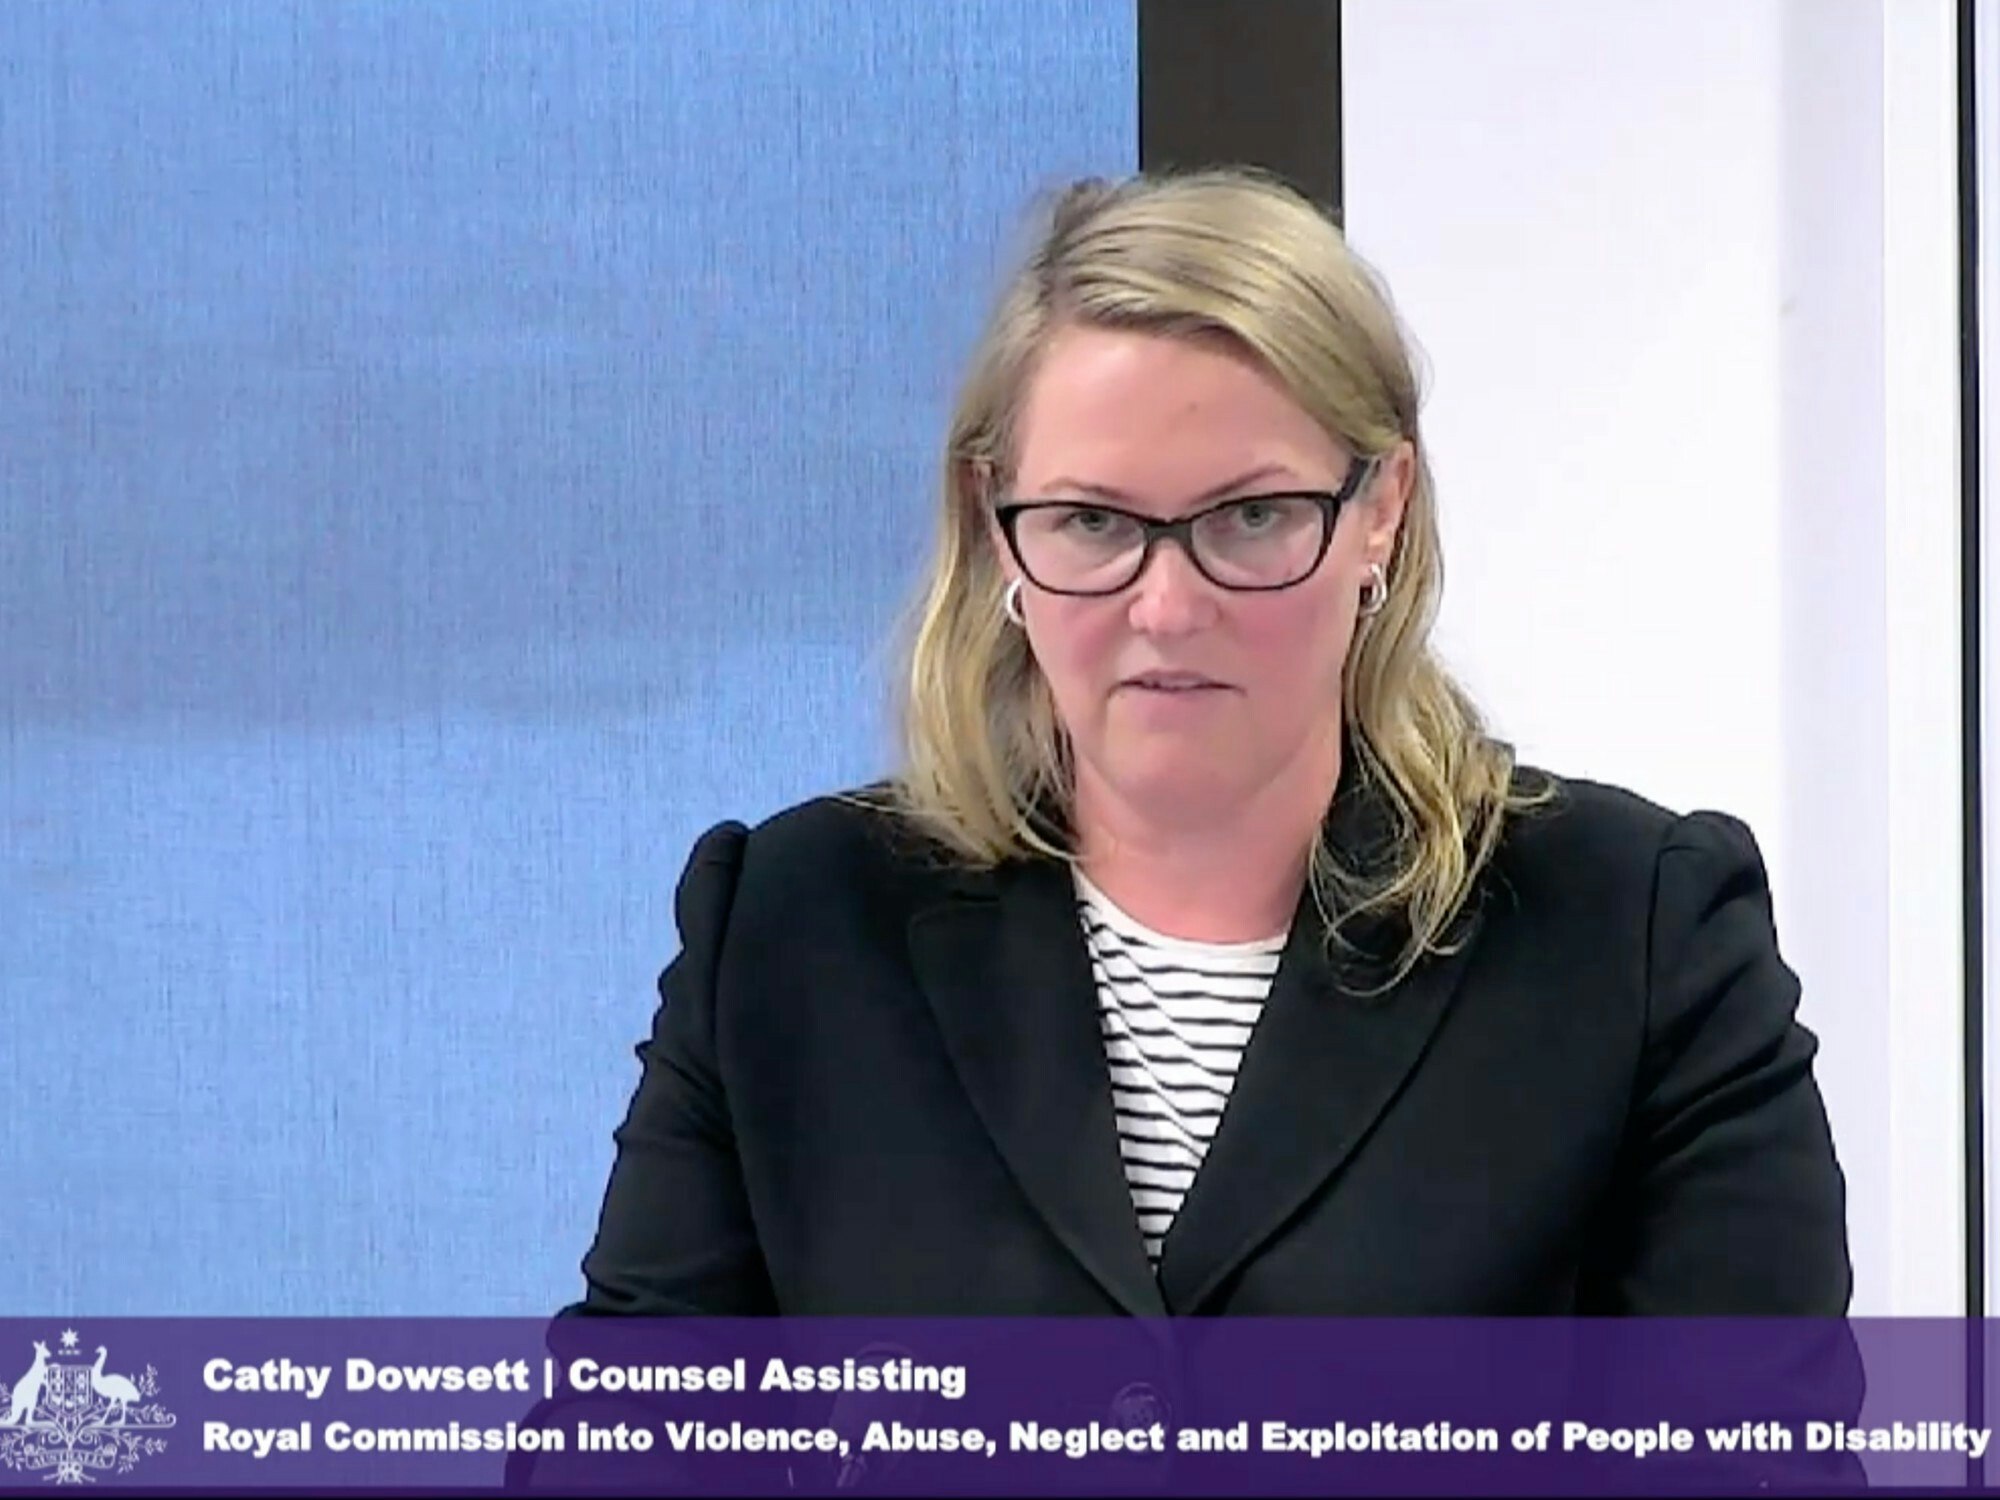 Public Hearing 21 of the Disability Royal Commission focused on a case study of a Disability Employment Service and participant. [Source: Disability Royal Commission]
